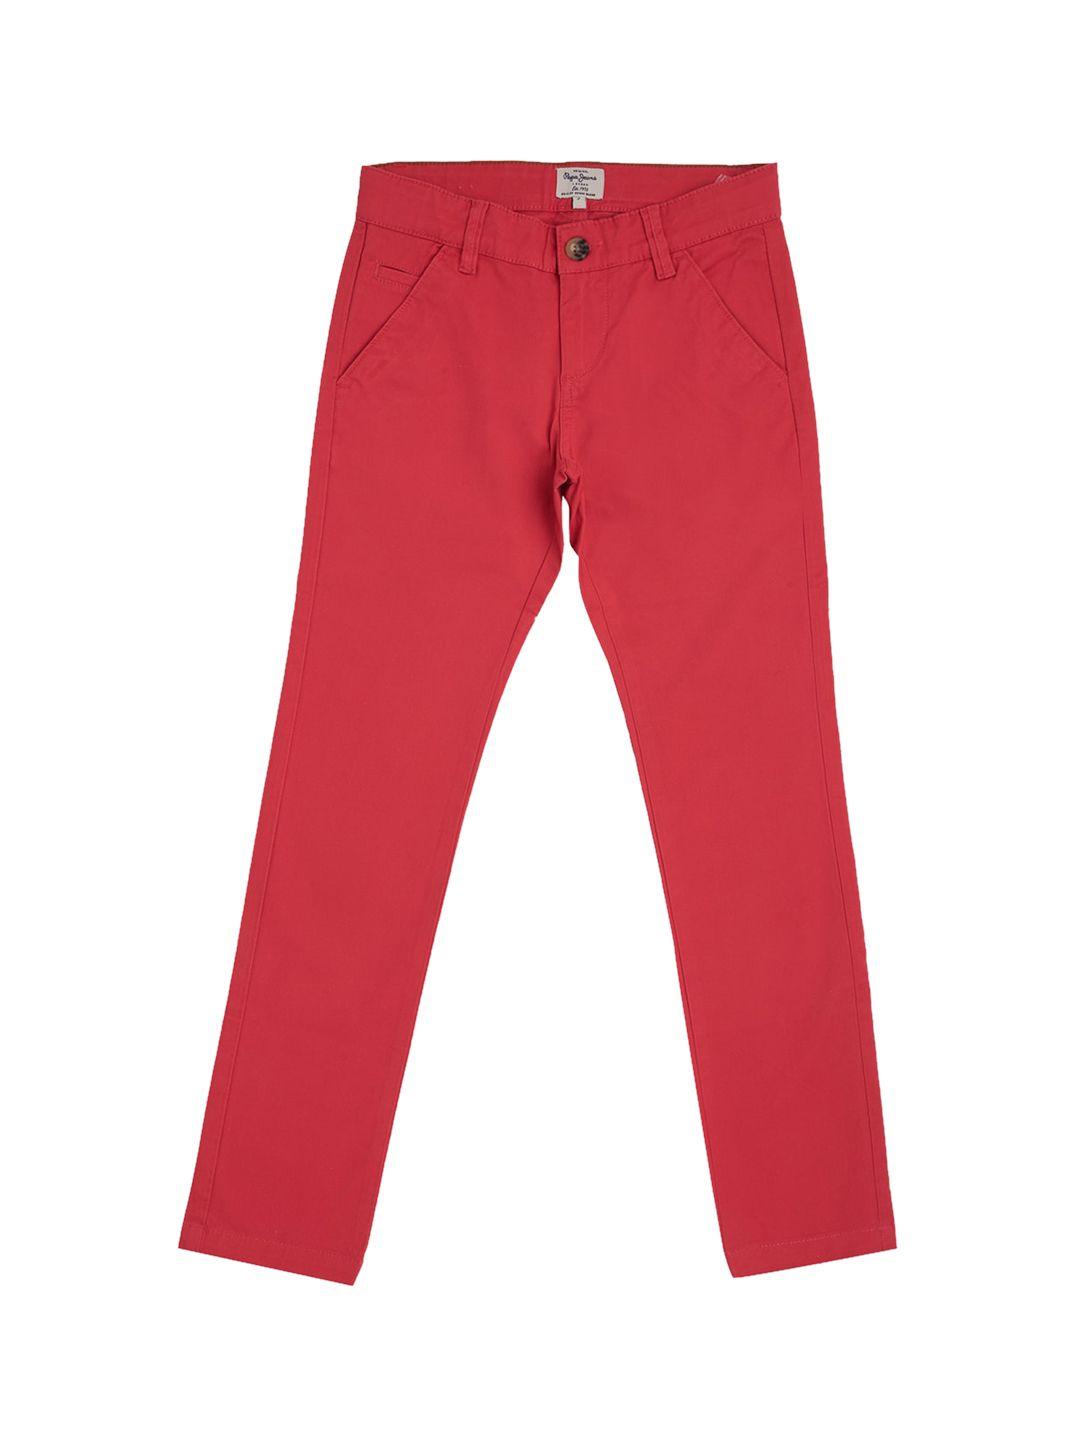 pepe jeans boys red mid rise regular fit chinos trousers